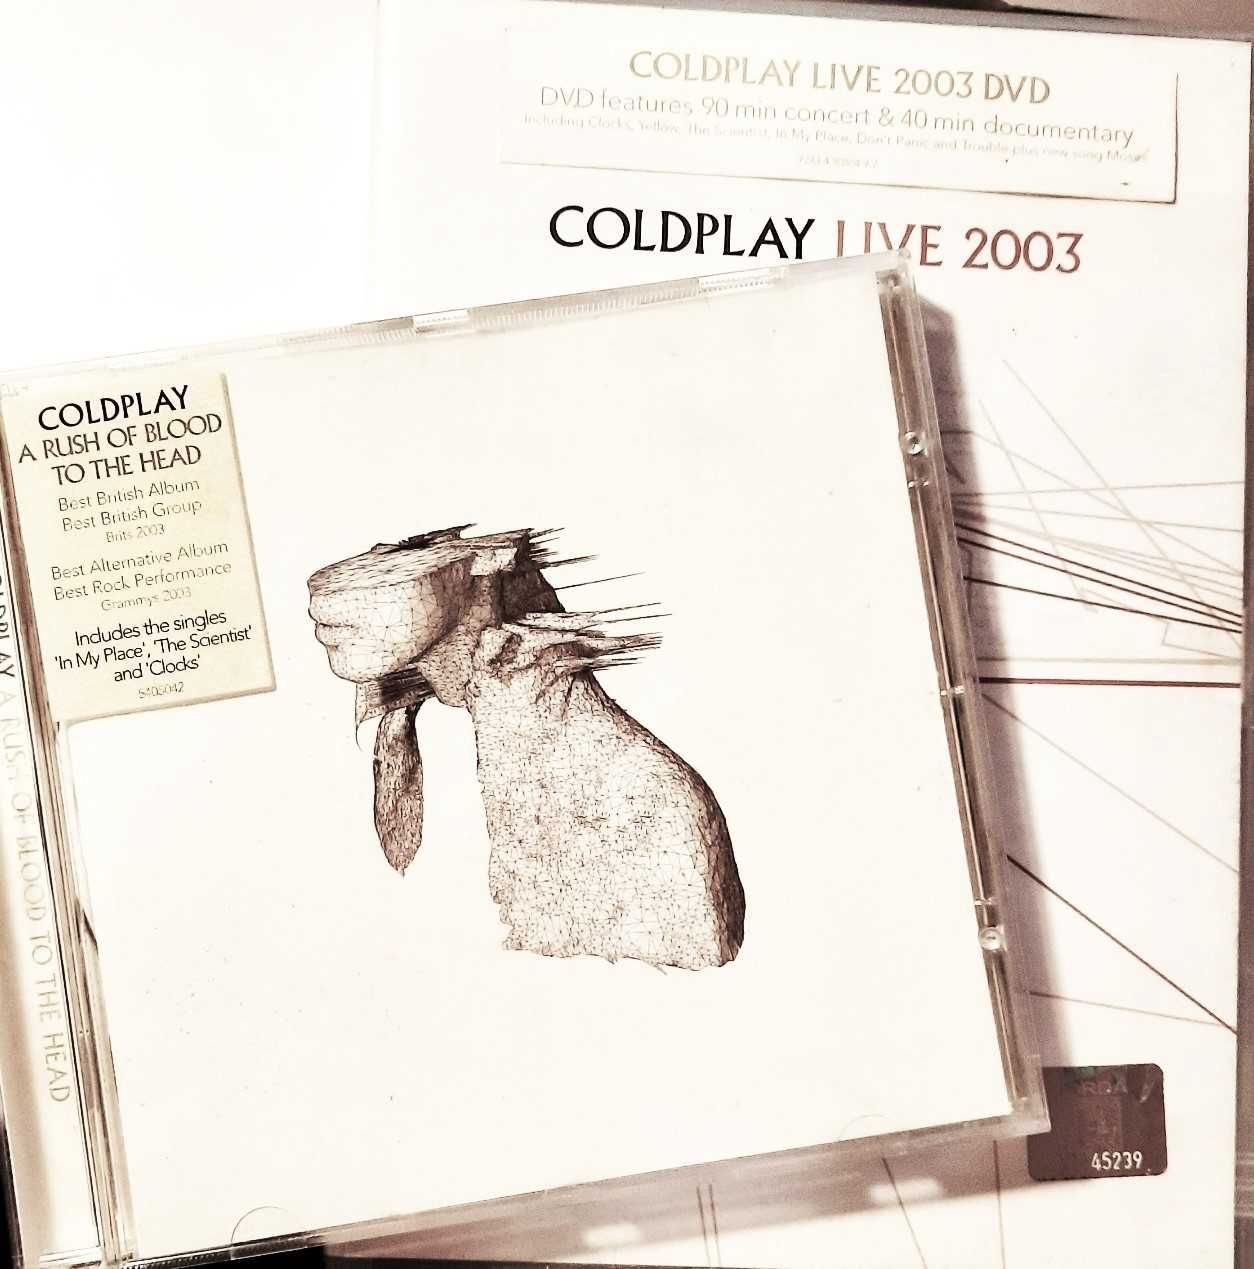 Coldplay CD 'A Rush of Blood to the Head' + DVD Concert 2003